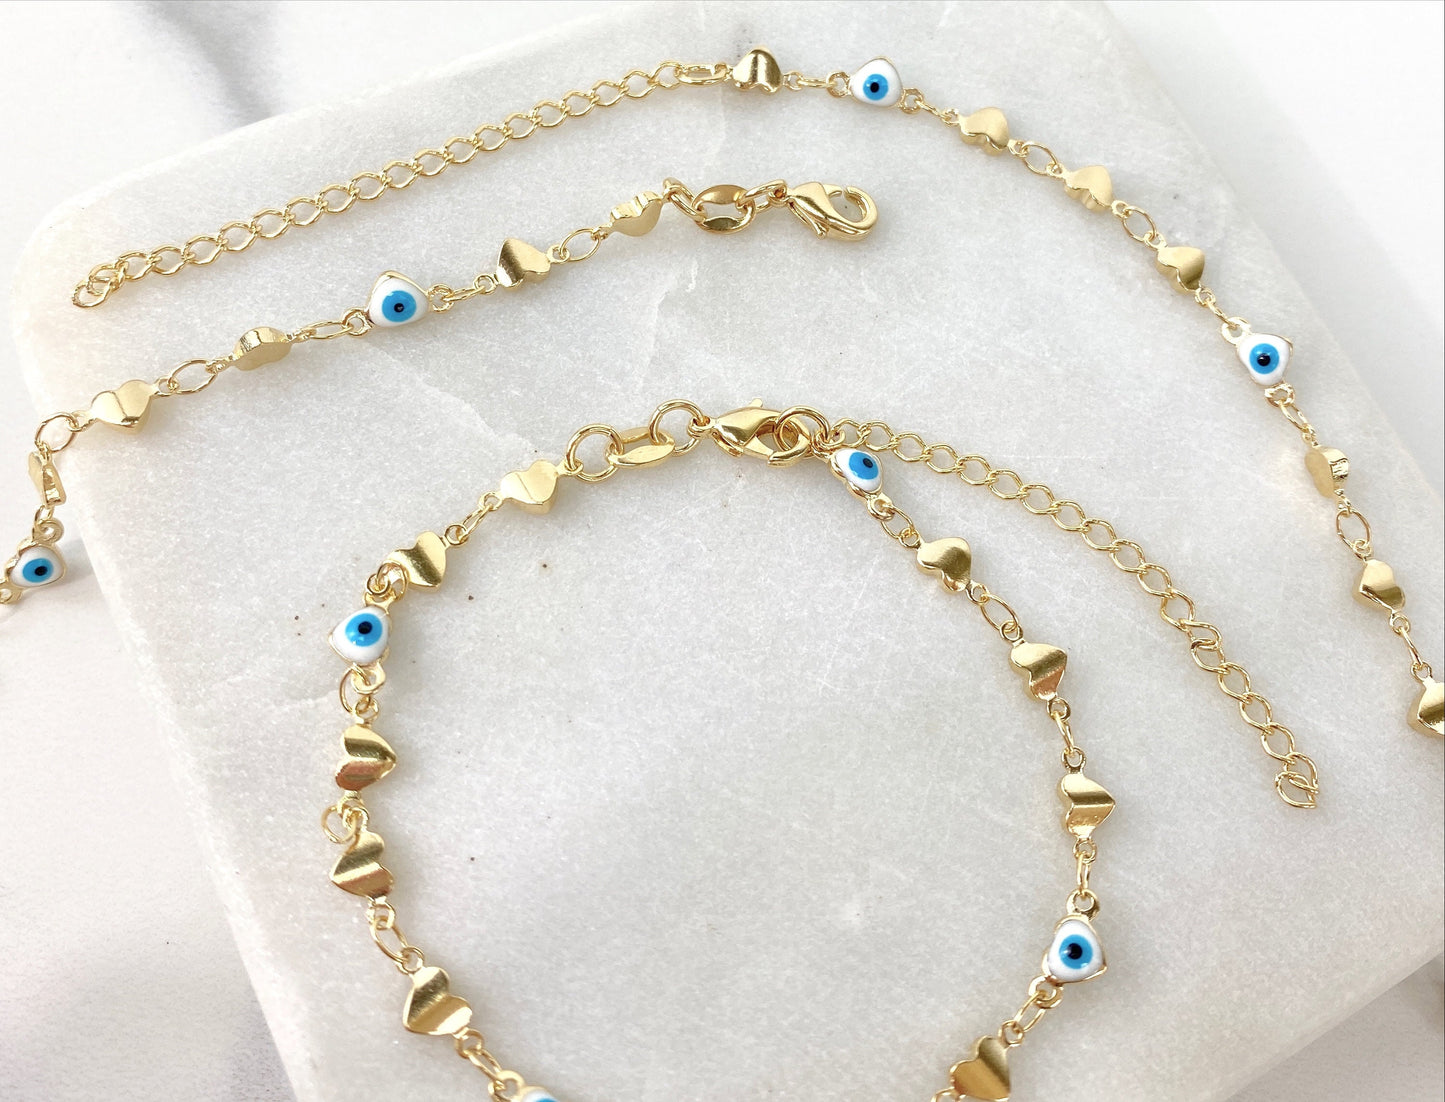 18k Gold Filled 5mm Hearts and Evil Eye Bracelet or Necklace with Extender for Wholesale and Jewelry Supplies